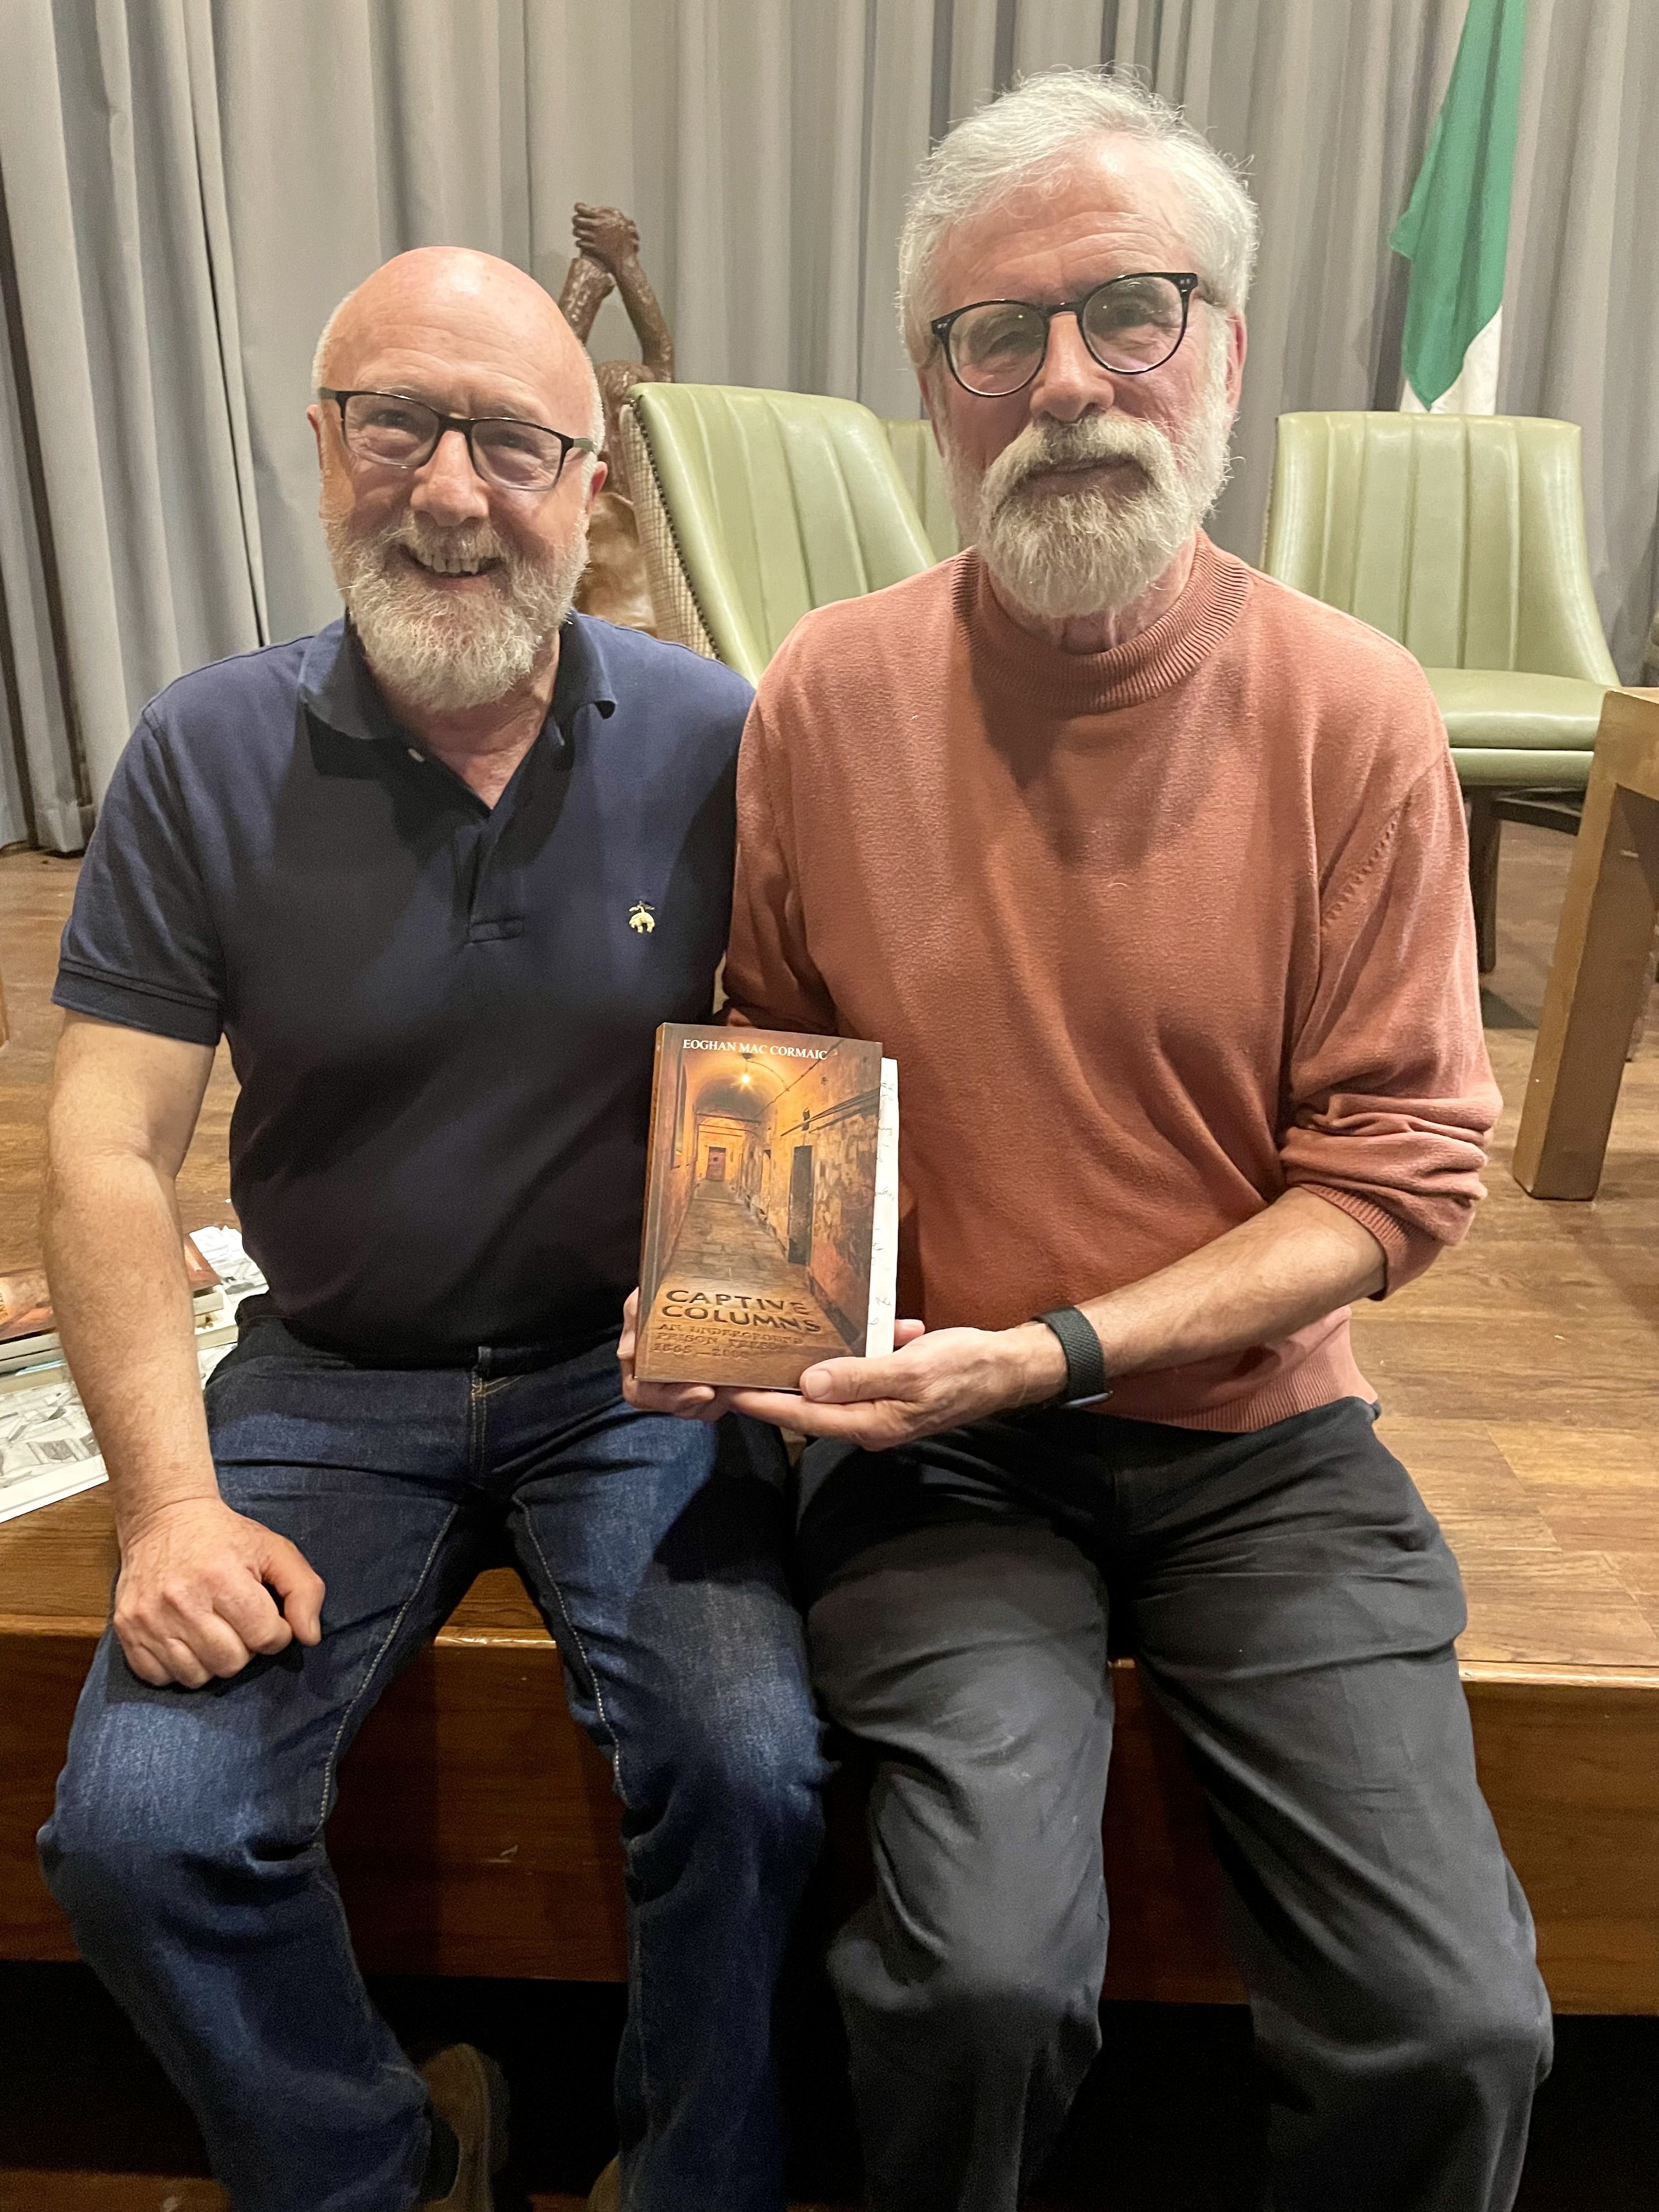 HISTORY MAN: Eoghan \'Gino\' Mac Cormac with Gerry Adams at the launch of Gino\'s new book on the history of Irish prisons